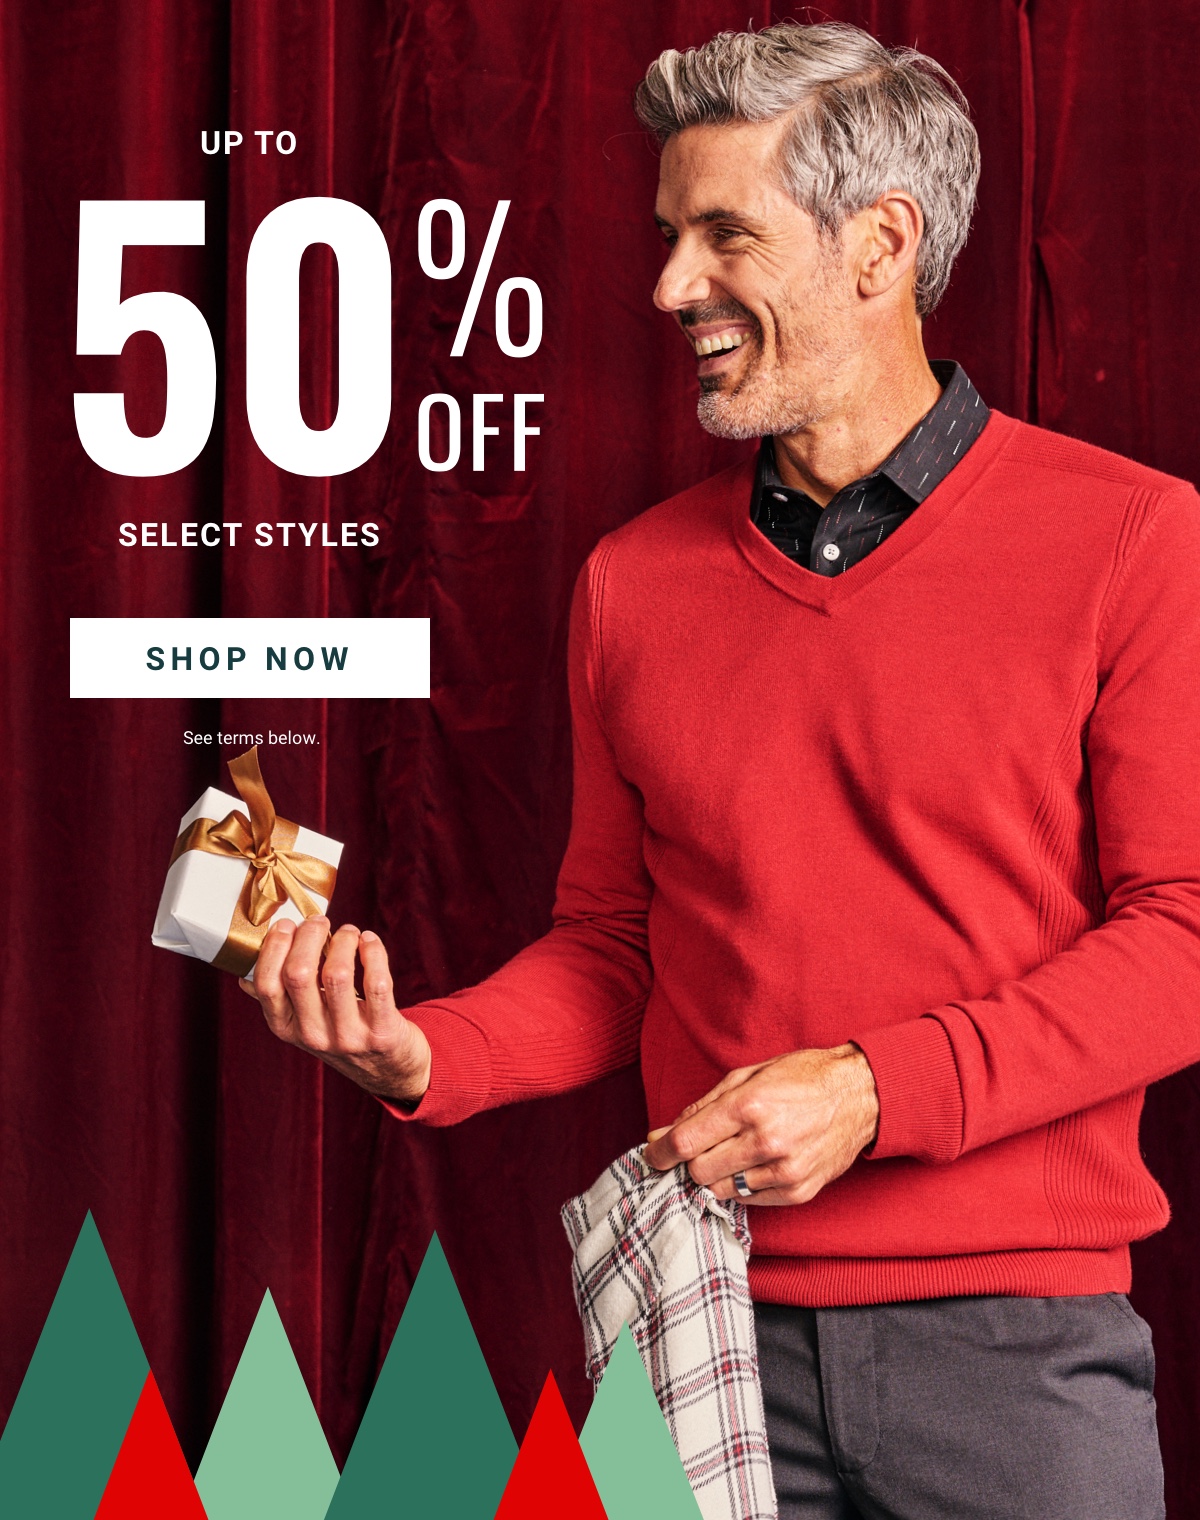 Up to 50% Off Select Styles - Shop Now